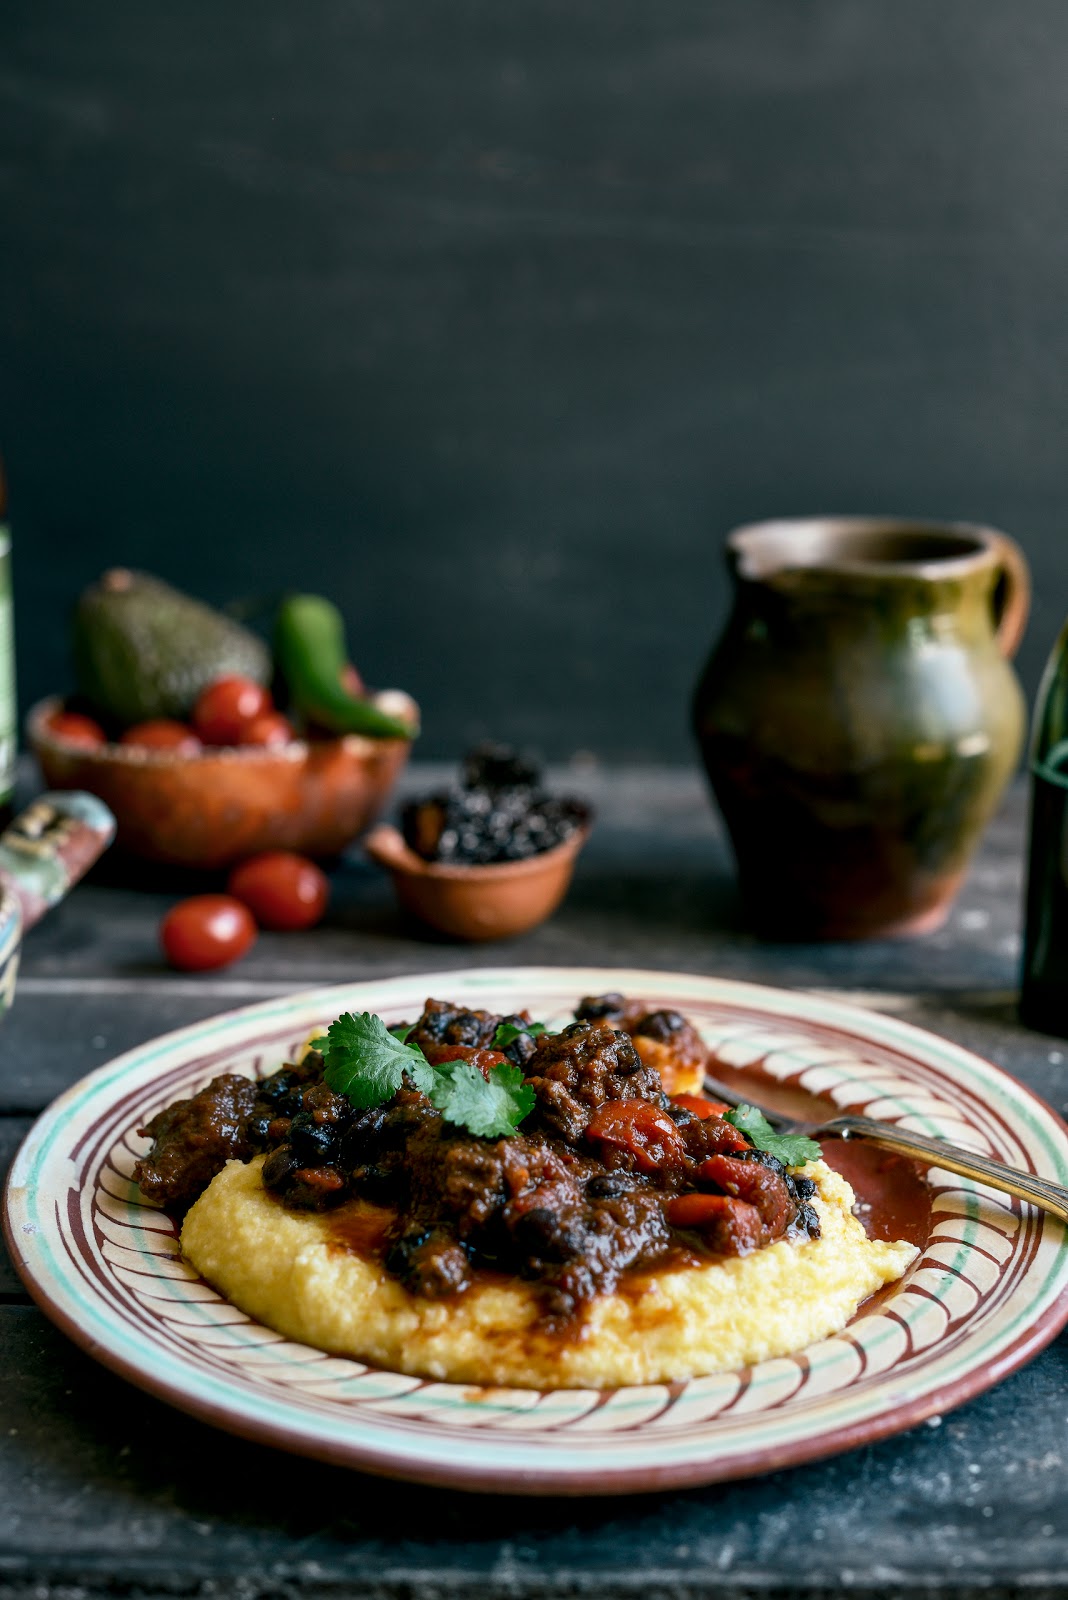 Mexican Braised Beef Cheeks with Soft Cheesy Polenta – Stuck in the kitchen